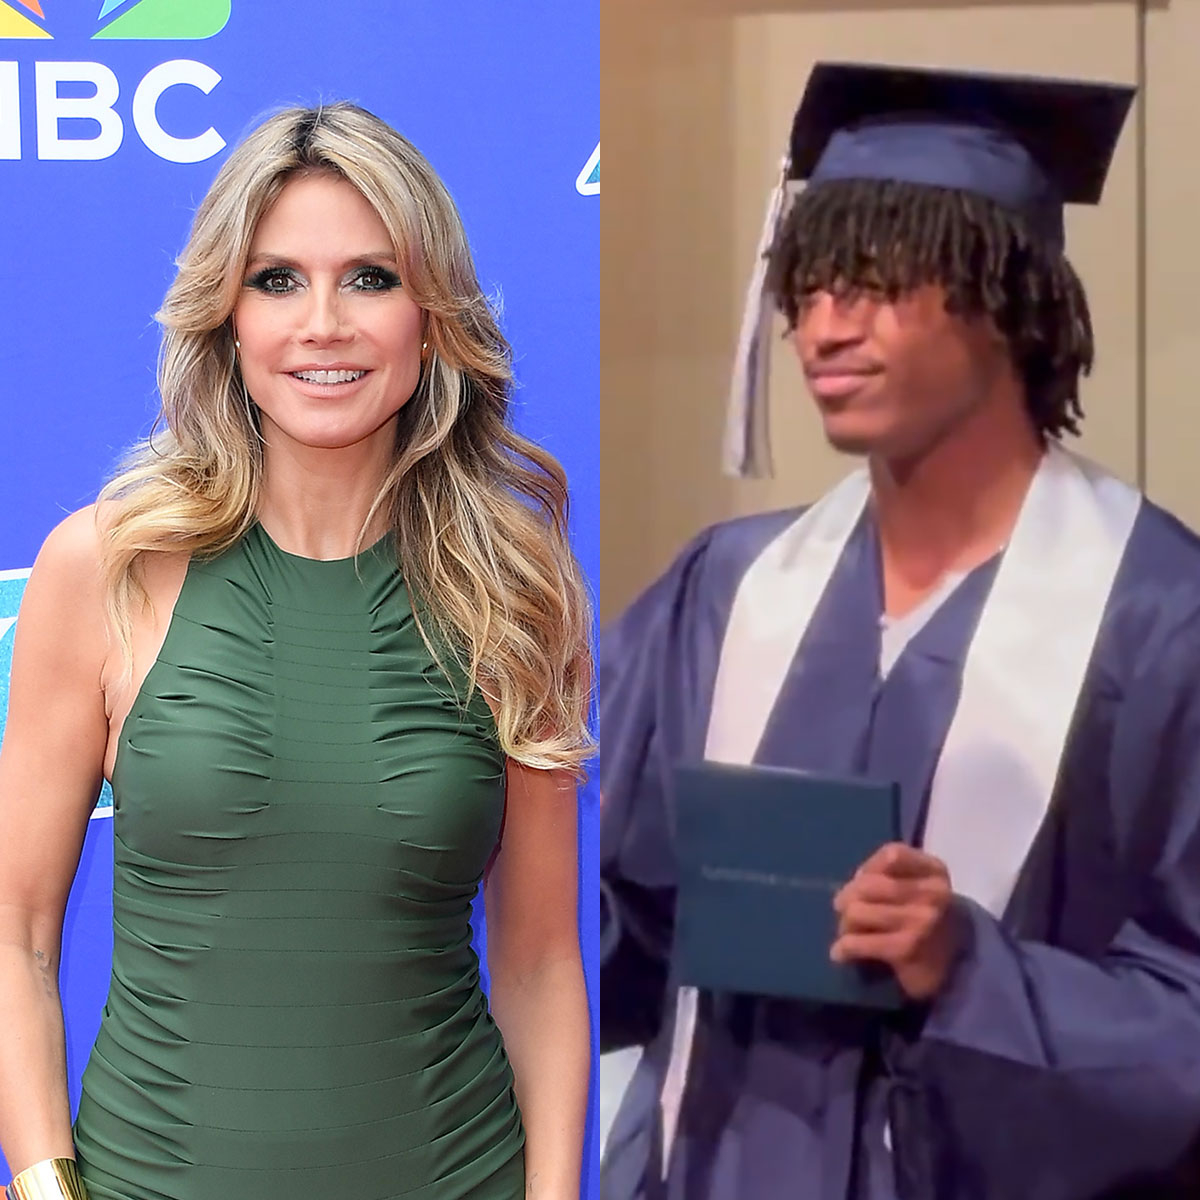 Heidi Klum Celebrates With Her and Seal’s Son Henry at His Graduation